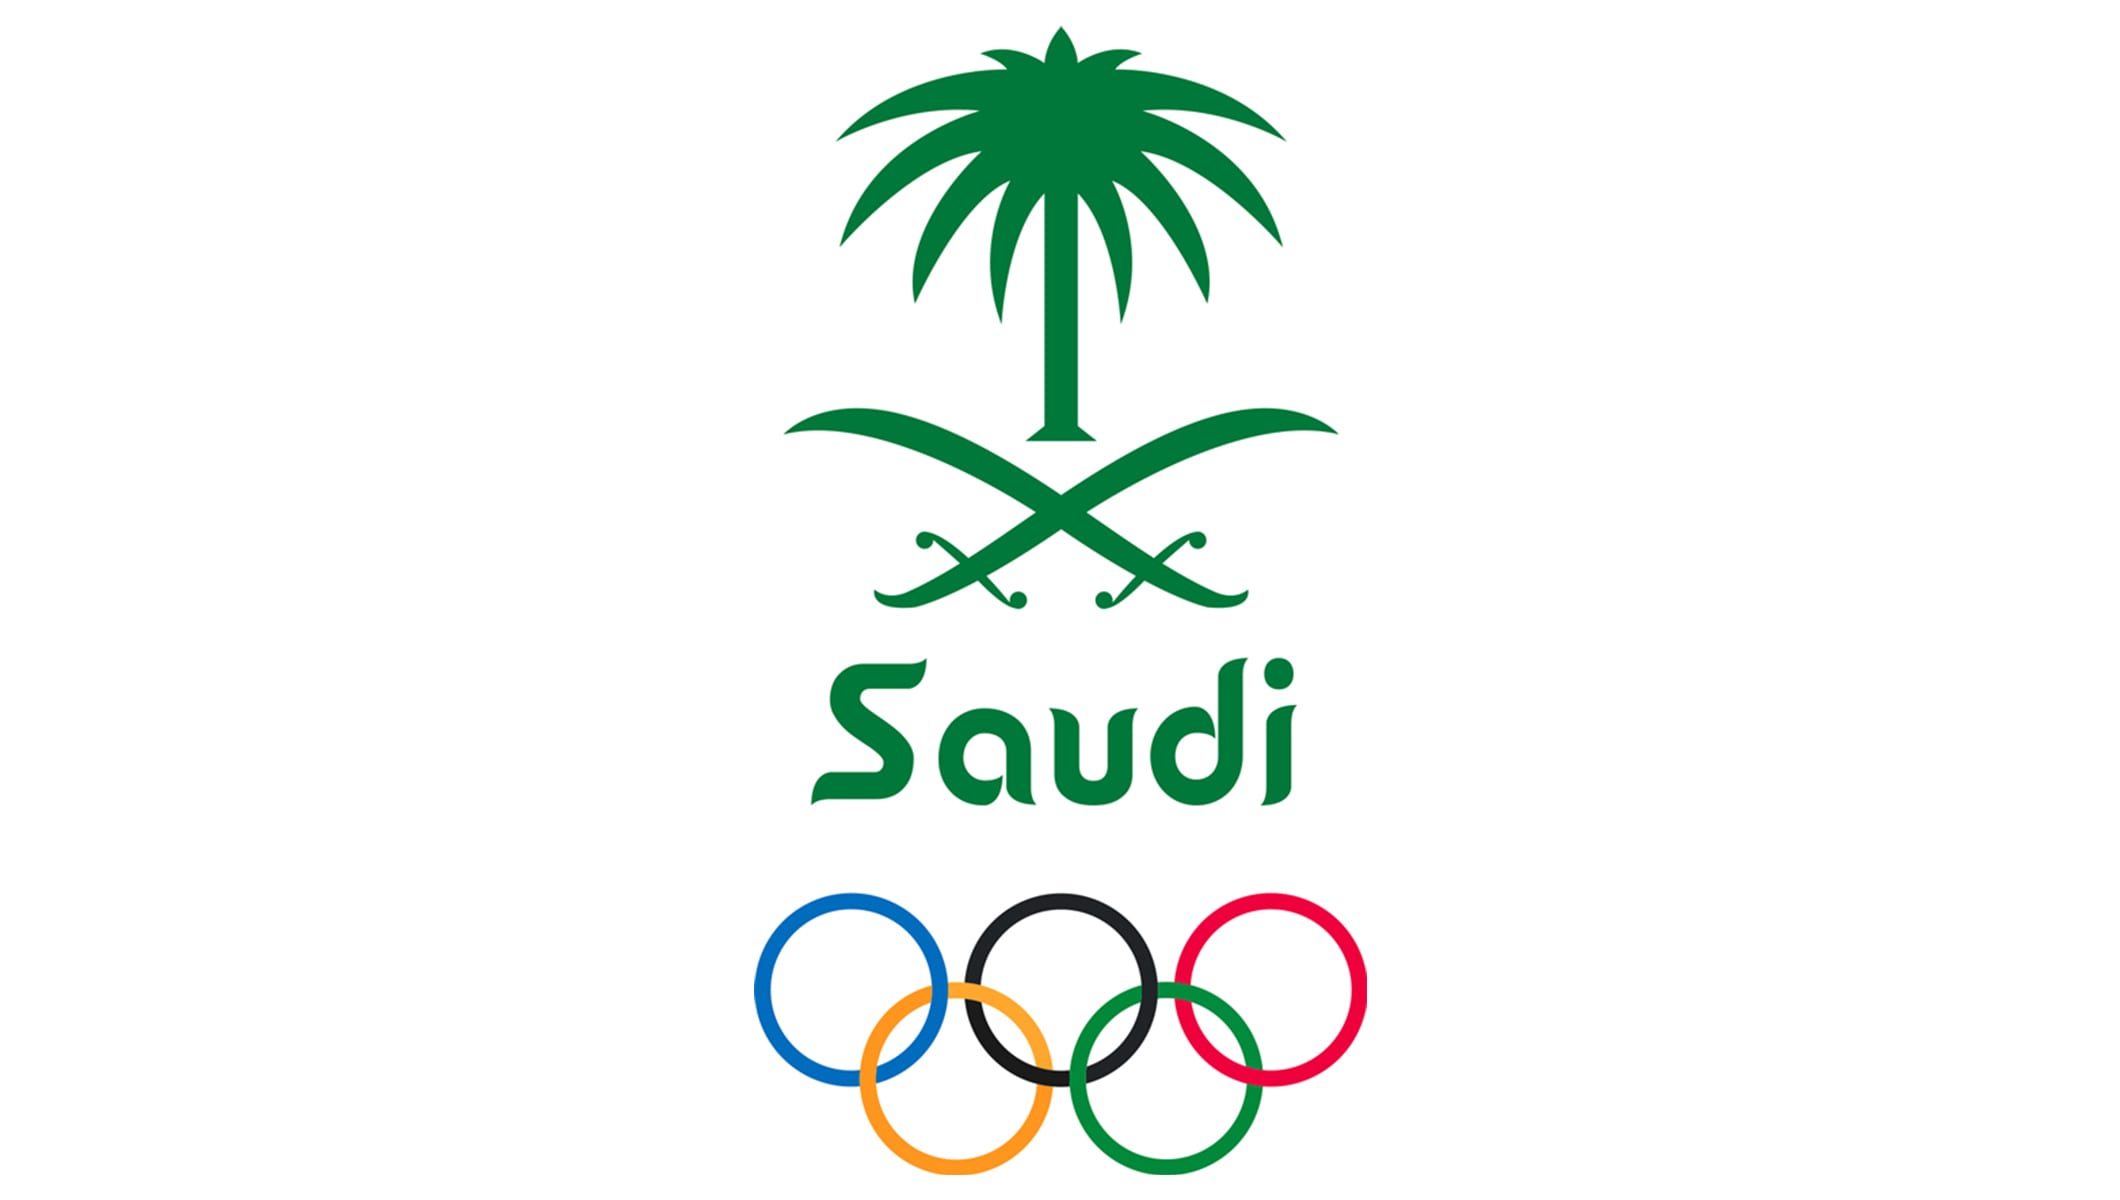 News from the National Olympic Committee of Saudi Arabia Olympic News